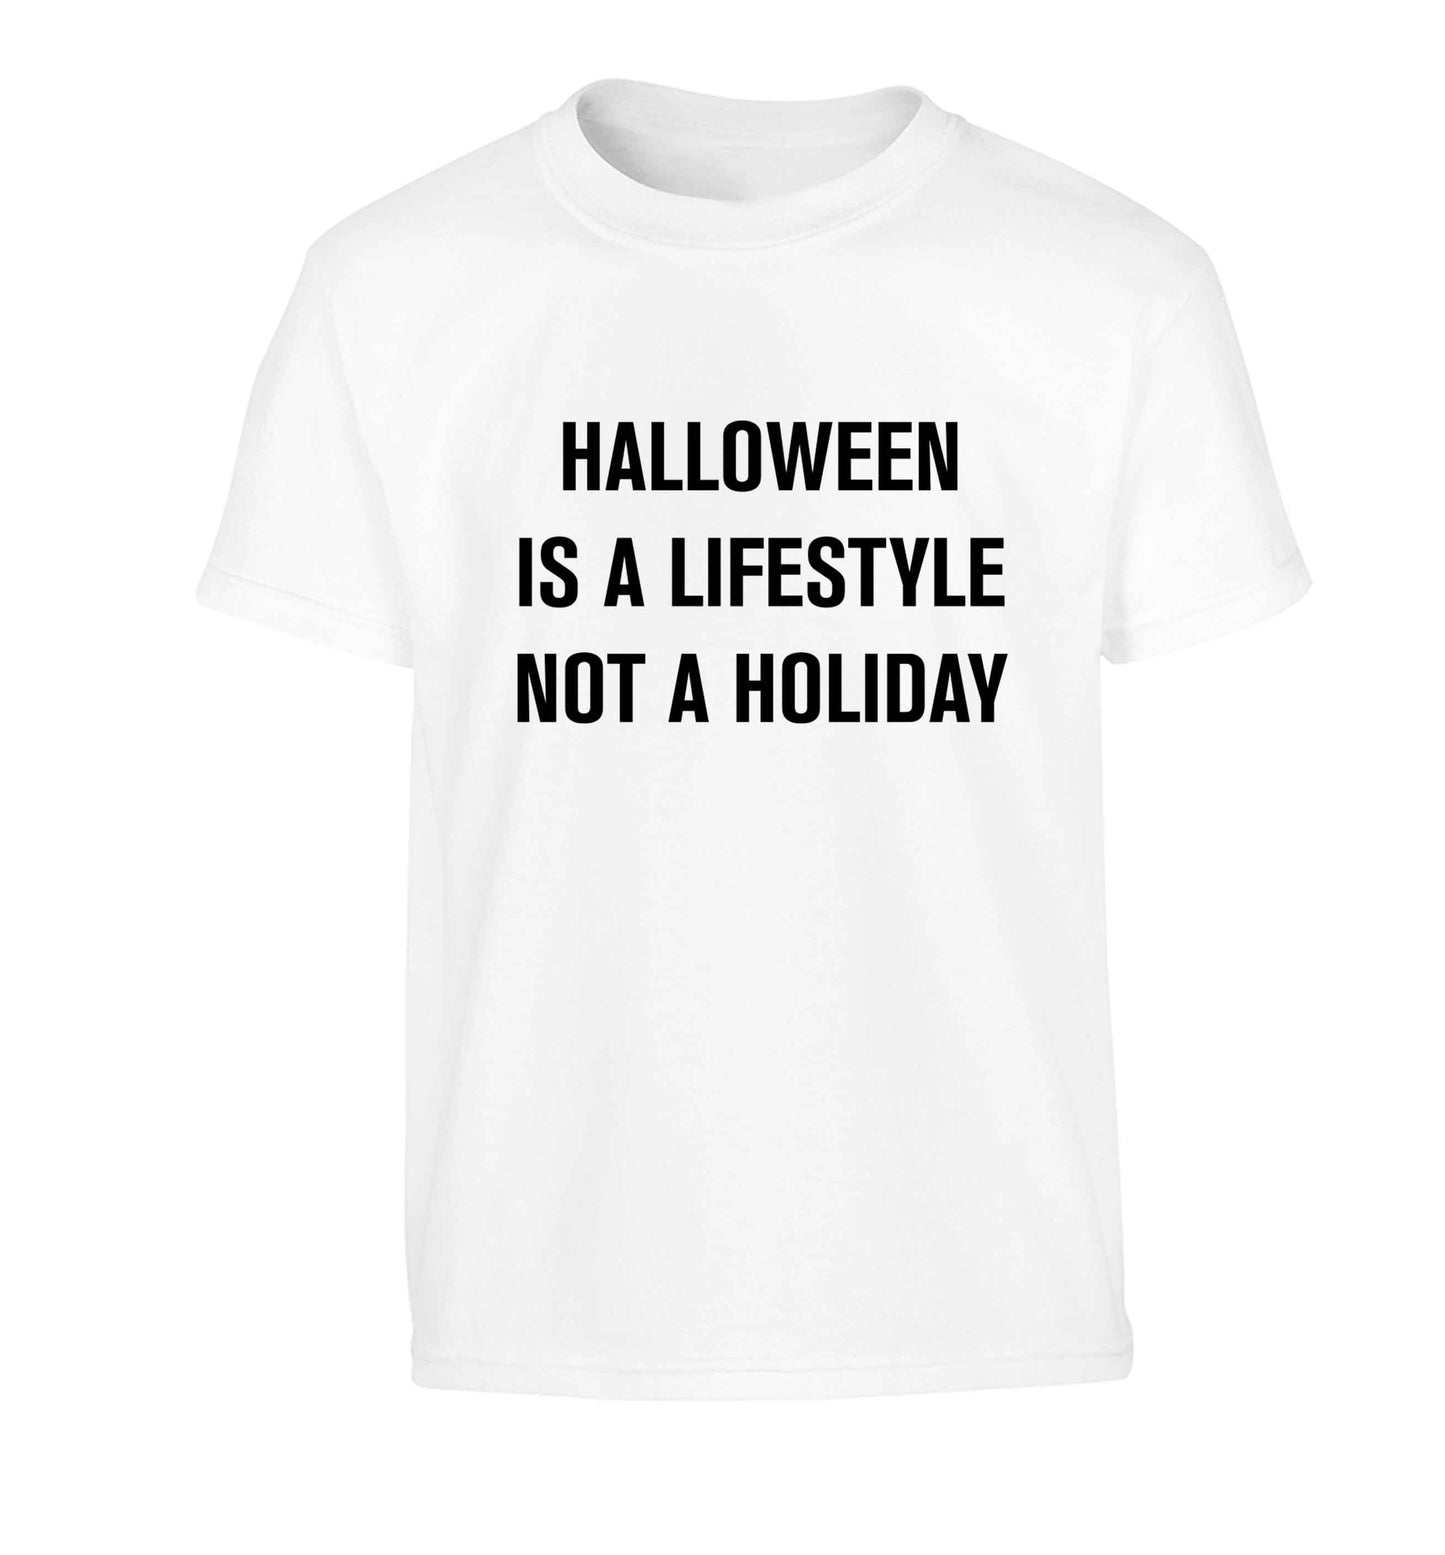 Halloween is a lifestyle not a holiday Children's white Tshirt 12-13 Years